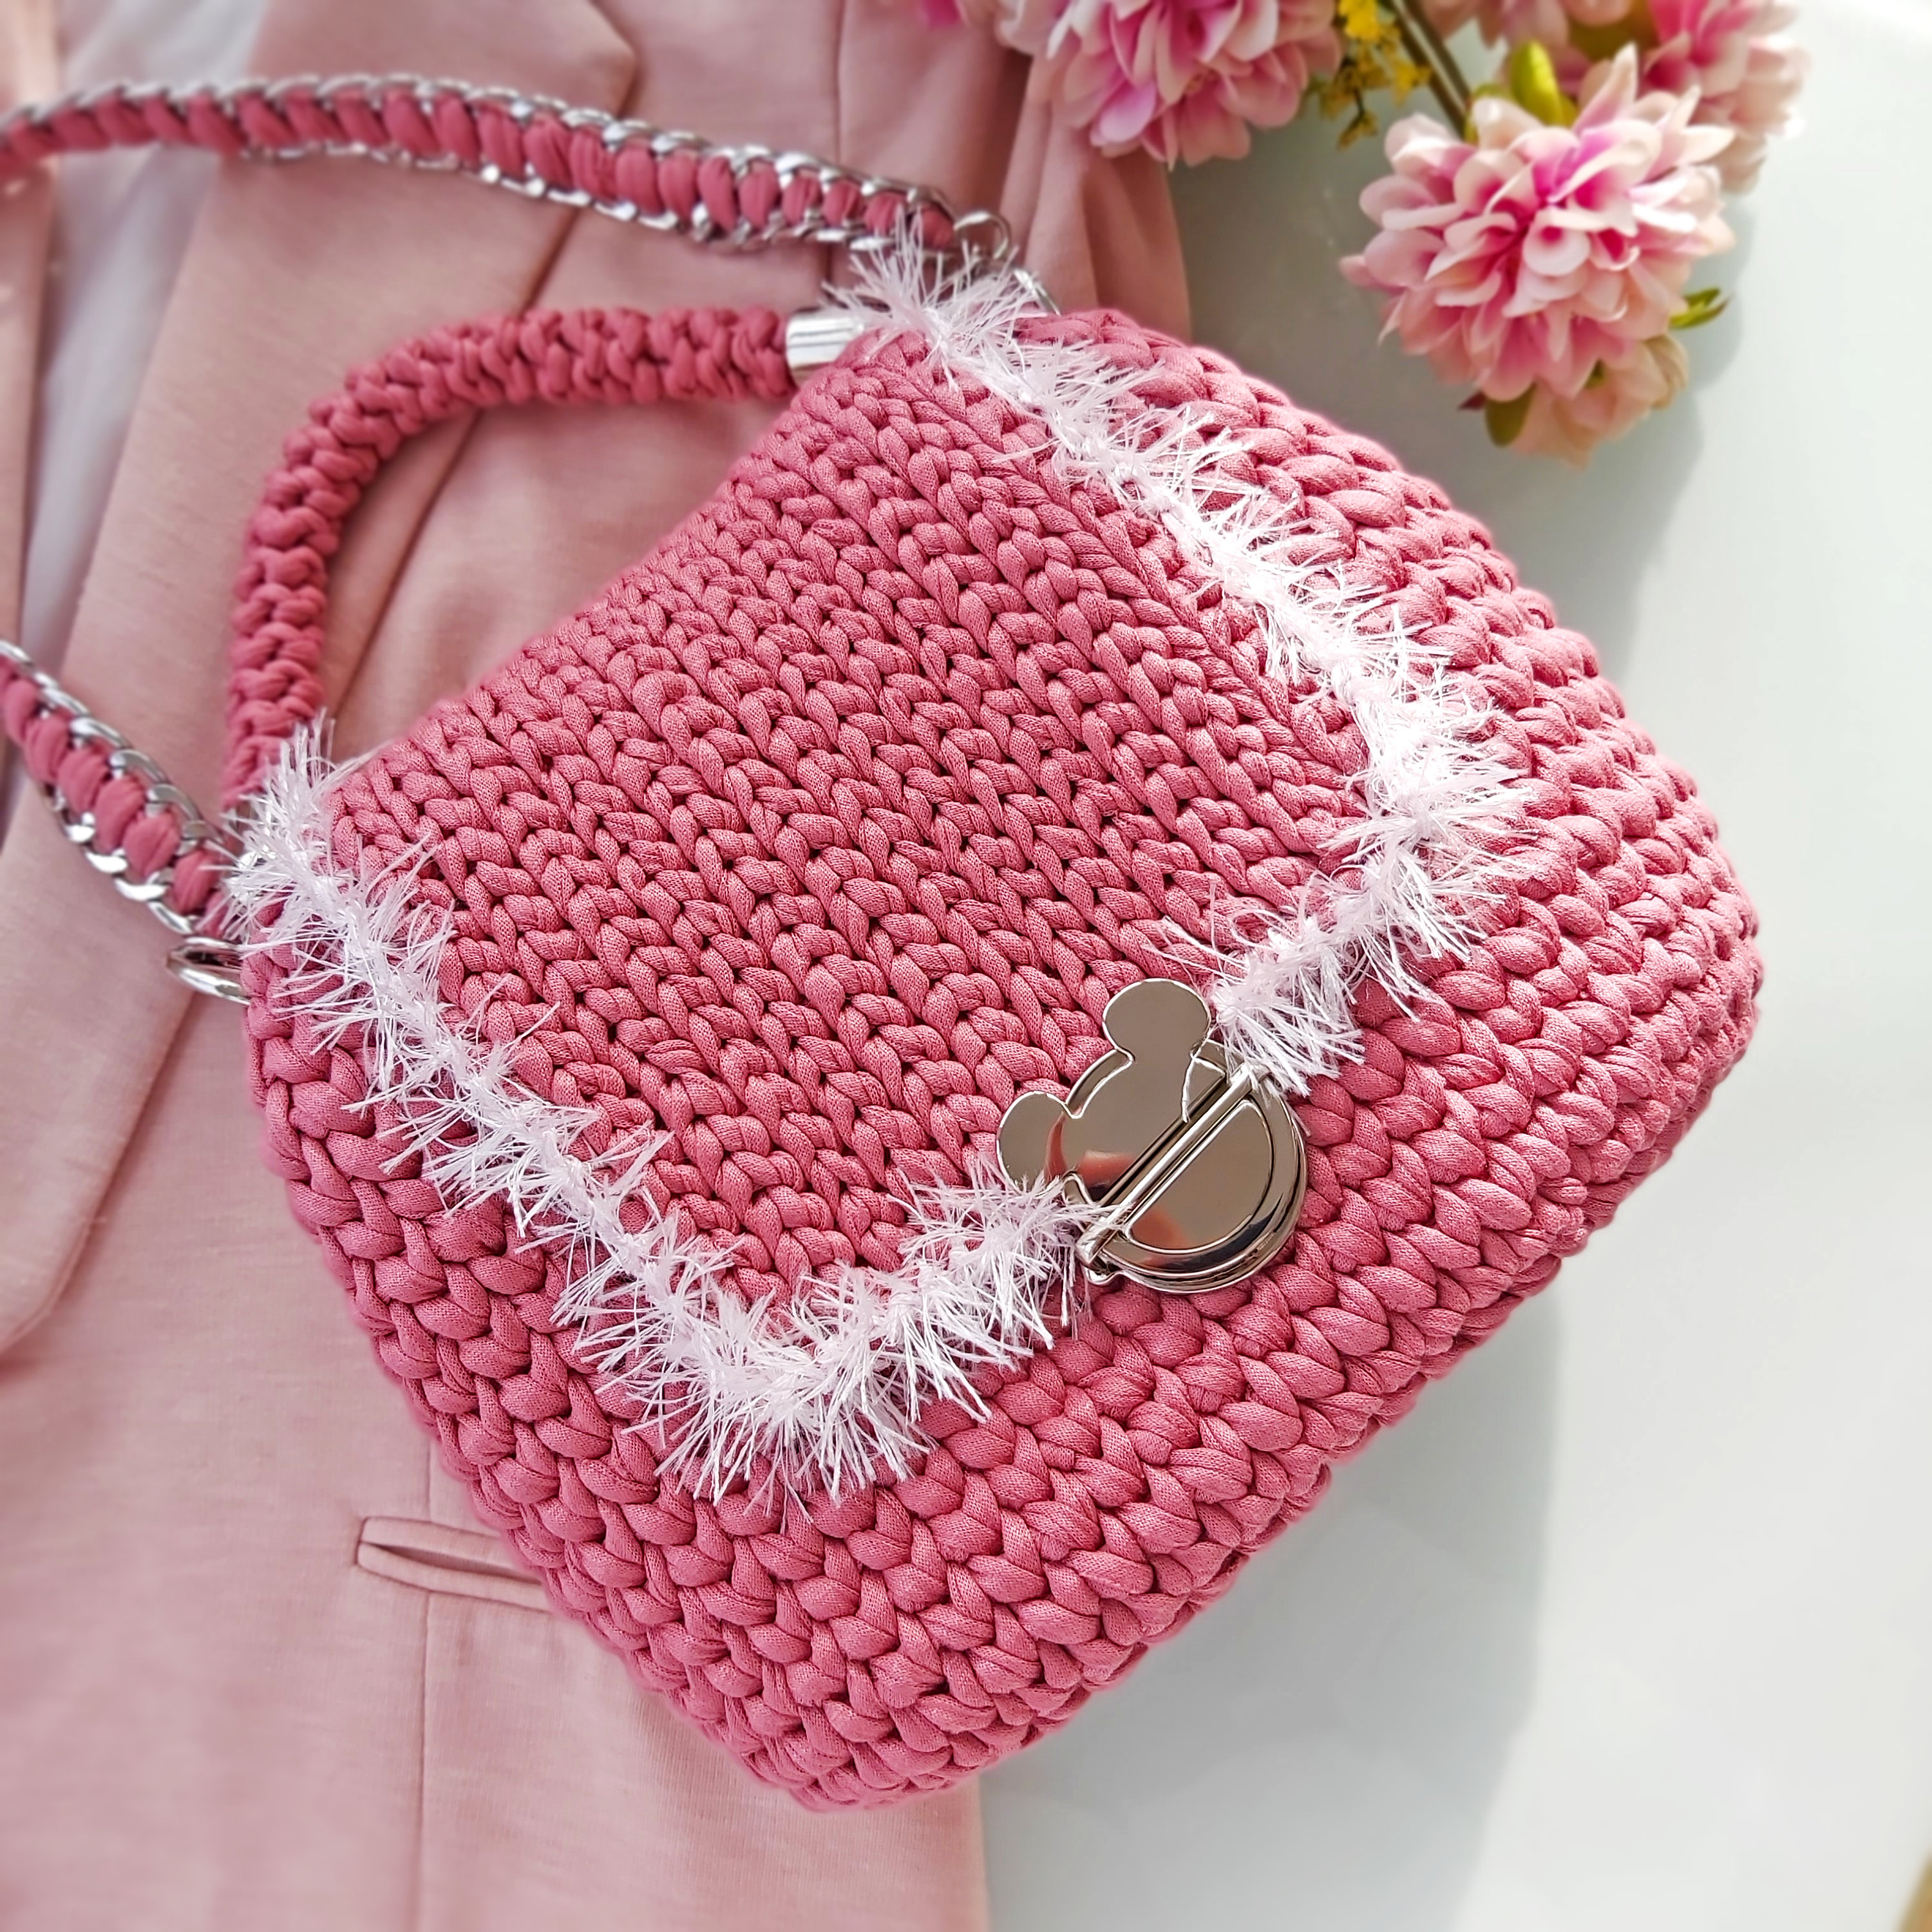  Wrist Handbag for Women Aesthetic Crochet Knit Tote Bag for  Women Wristlet Handbag Small Woven Shoulder Bag Sleeve Knot Pouch Purse  With Extension Band : Clothing, Shoes & Jewelry